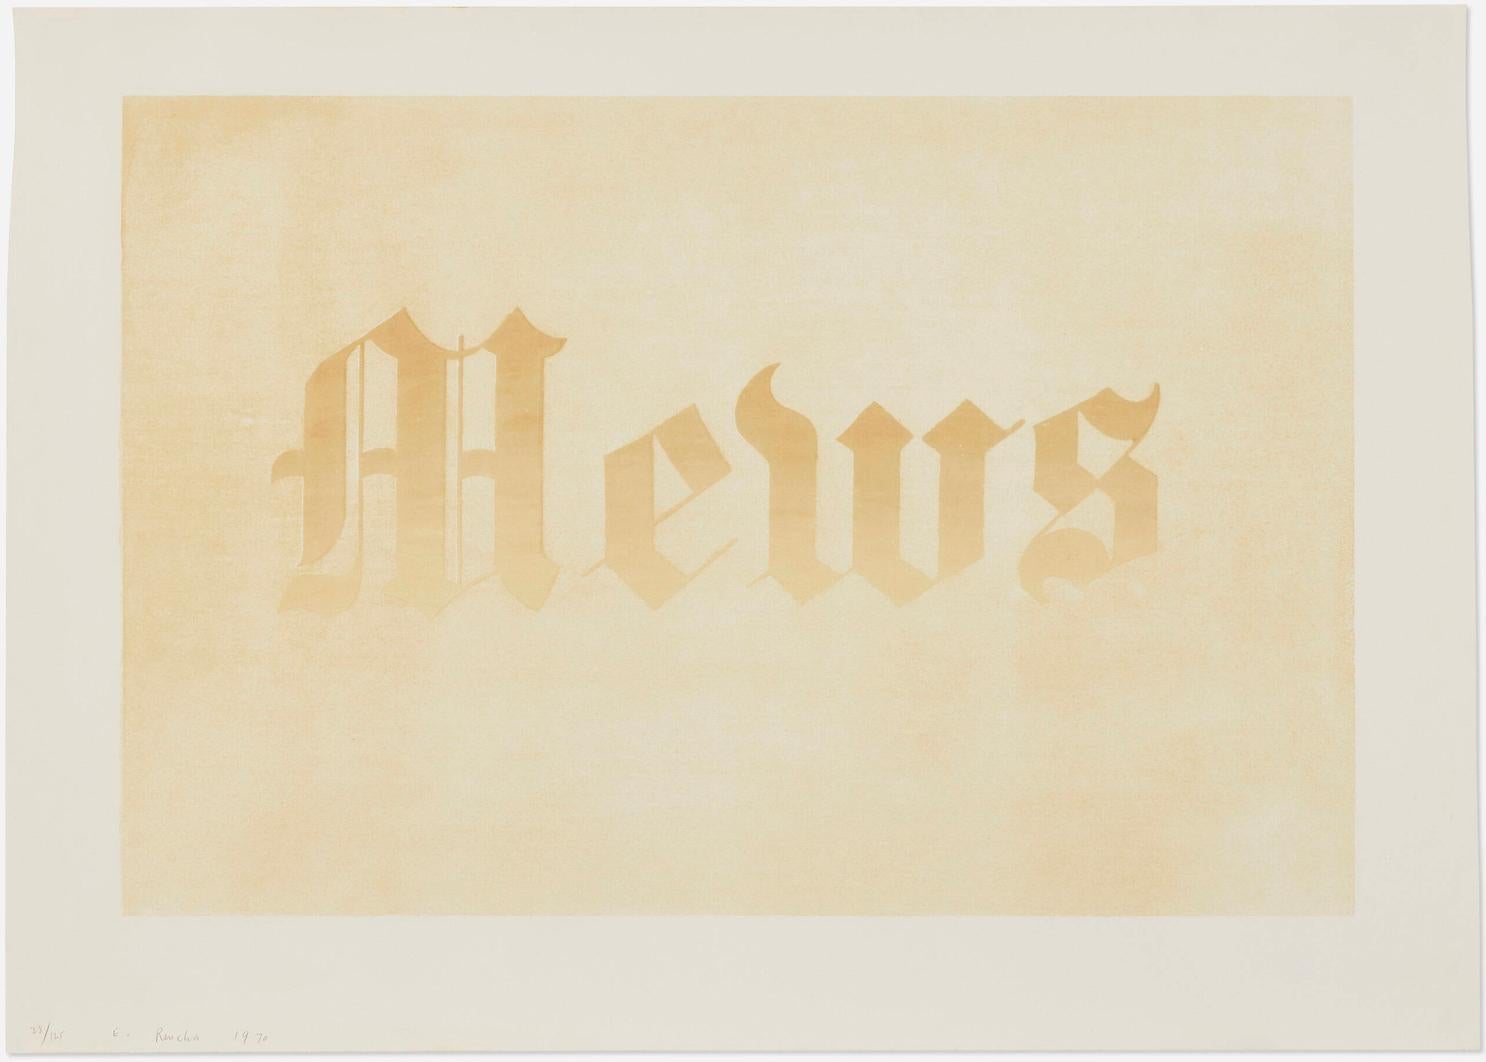 ED RUSCHA (1937-Present)

Organic screenprint, signed, dated and numbered to lower left ‘28/125 E. Ruscha 1970’. This work is number 28 from the edition of 125 printed by Alecto Studios, London and published by Editions Alecto, London.

Literature: